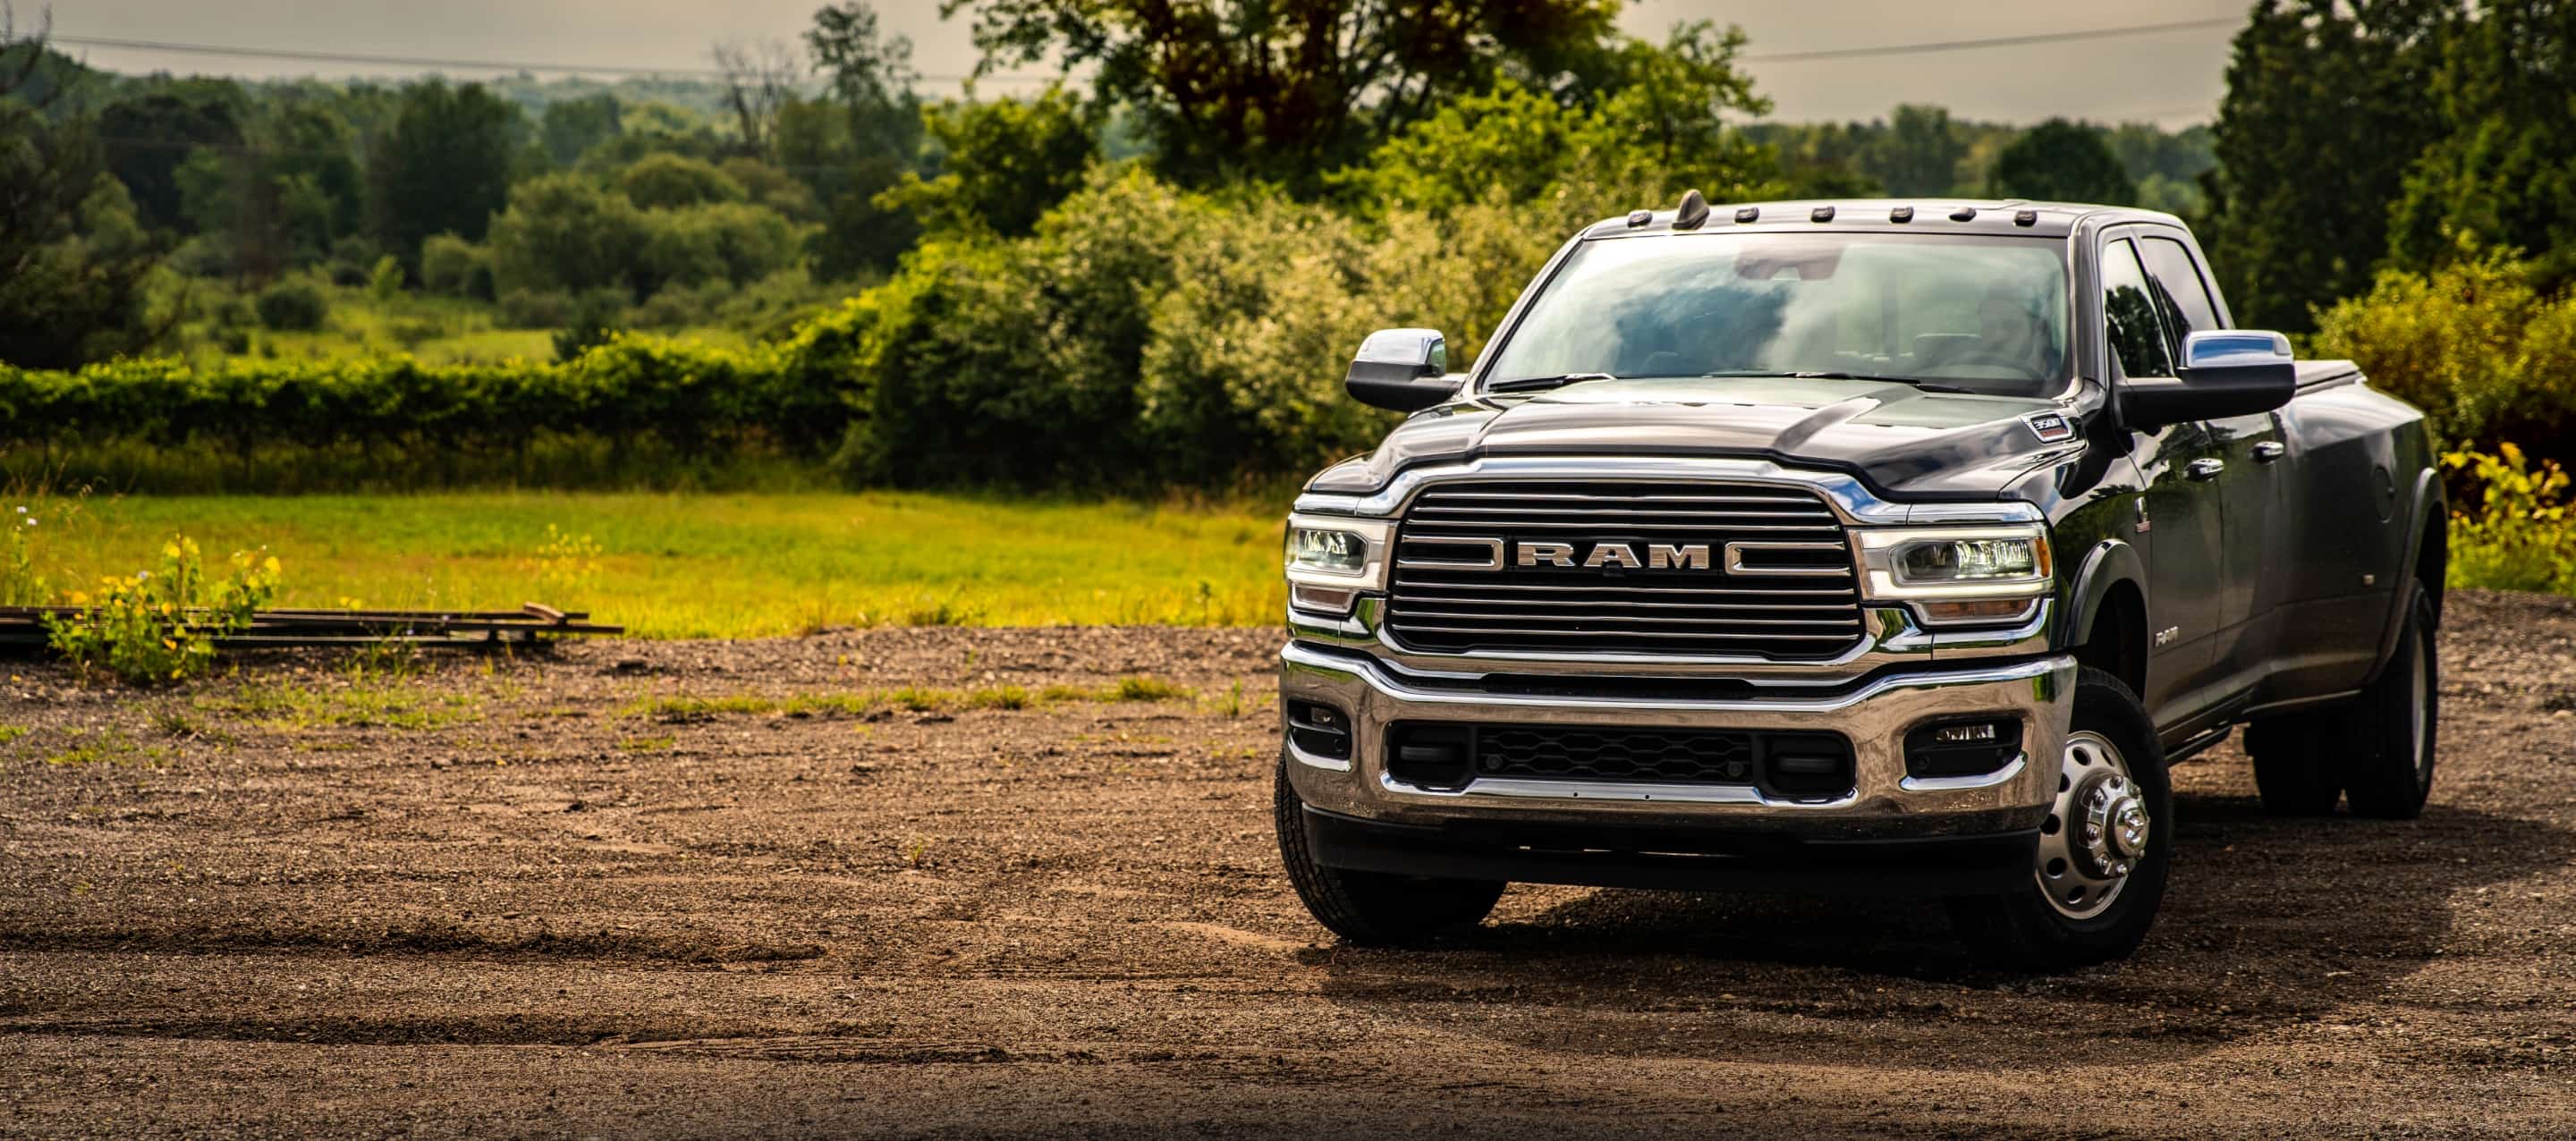 A head-on view of the 2022 Ram 3500 parked on gravel.